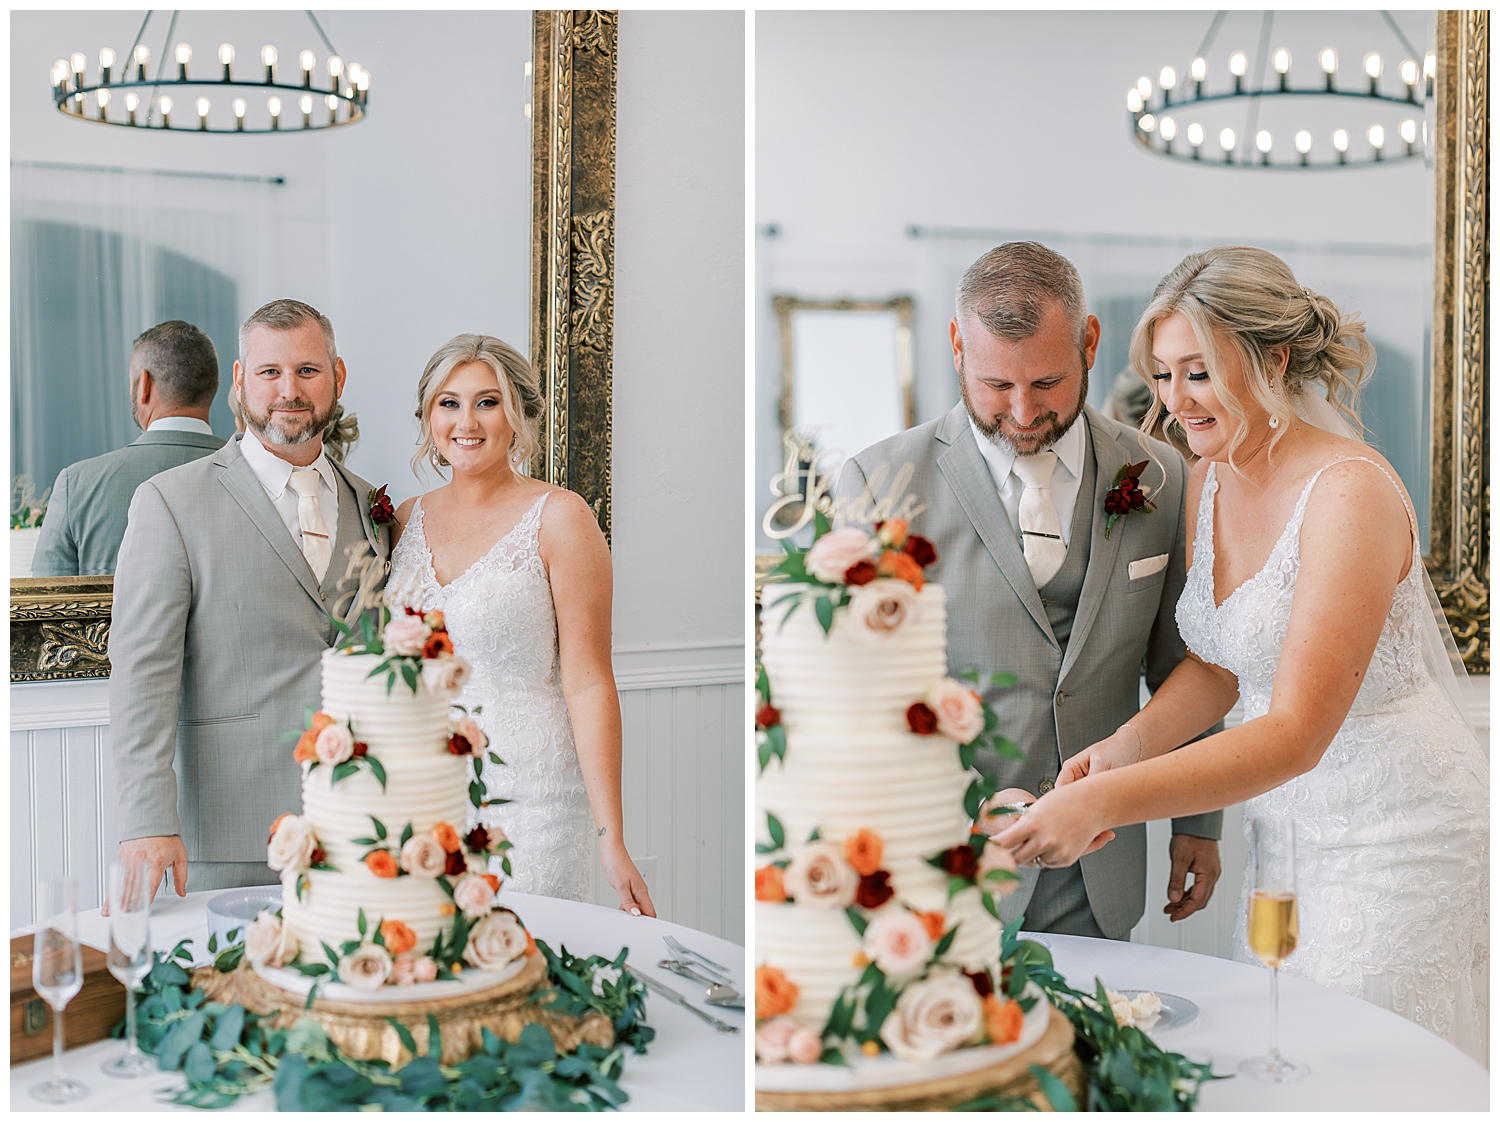 A husband and wife smile behind the cake.